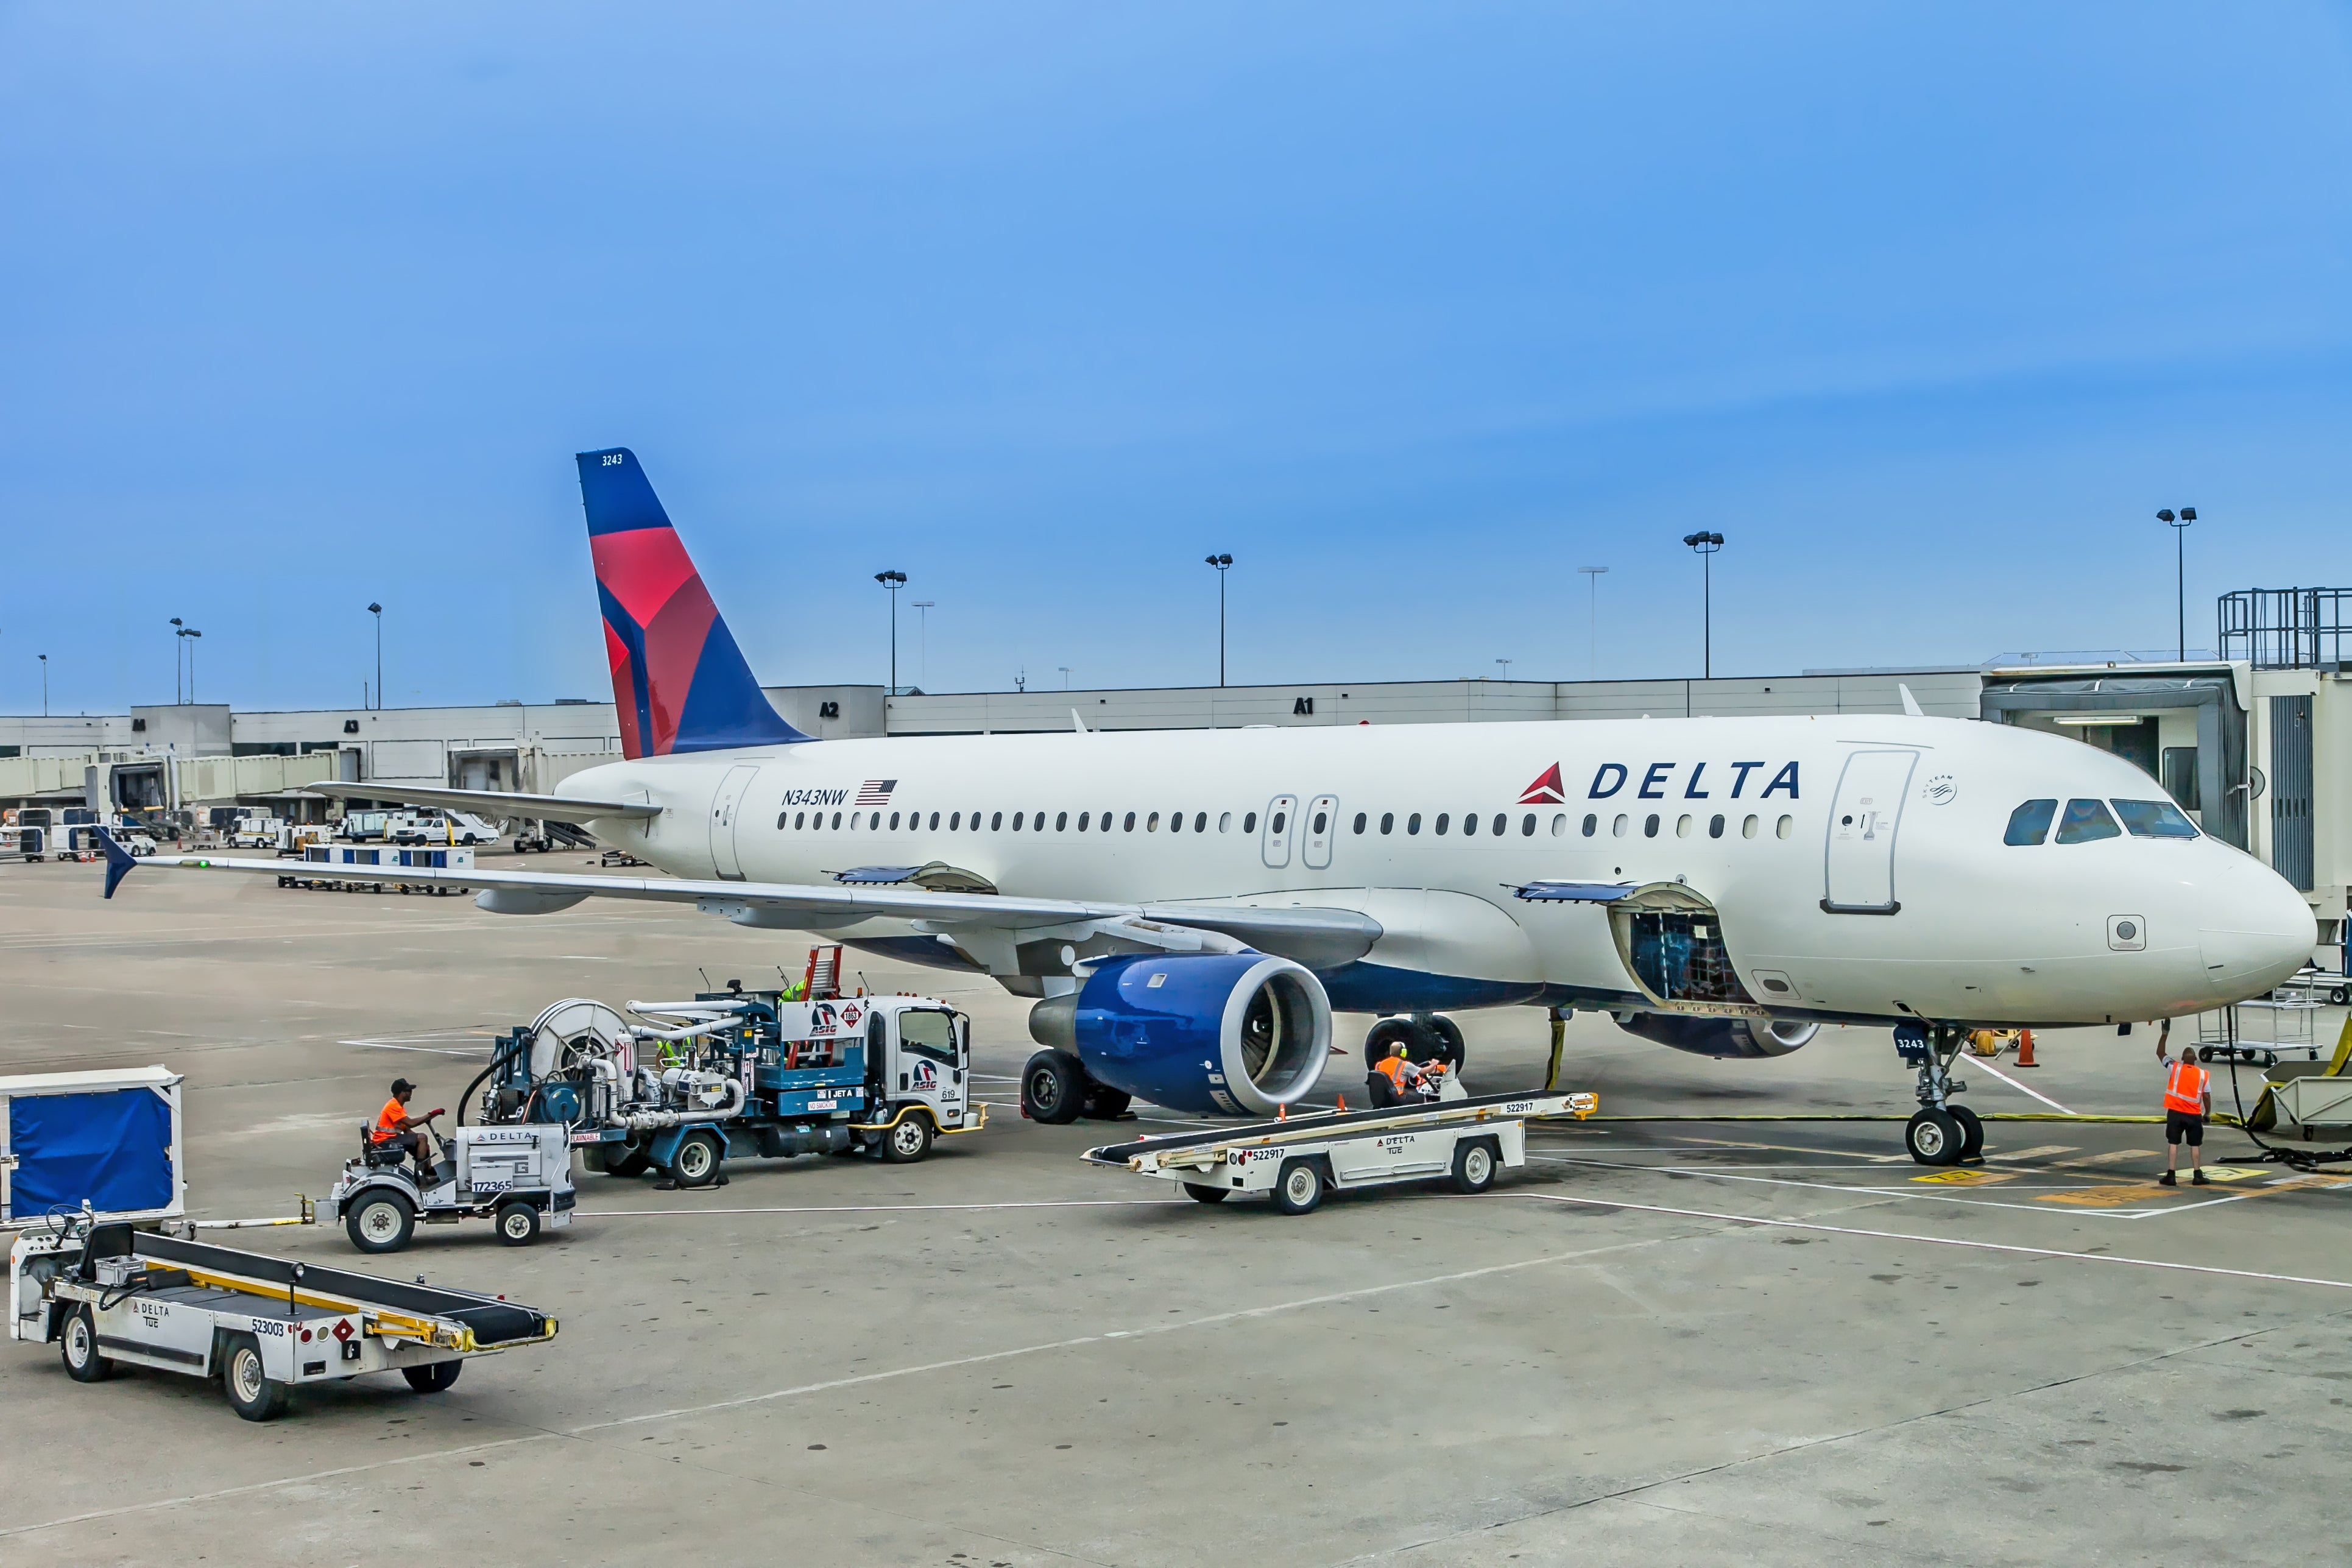 Delta Air Lines Boarding Zones - A Complete Guide [2020]